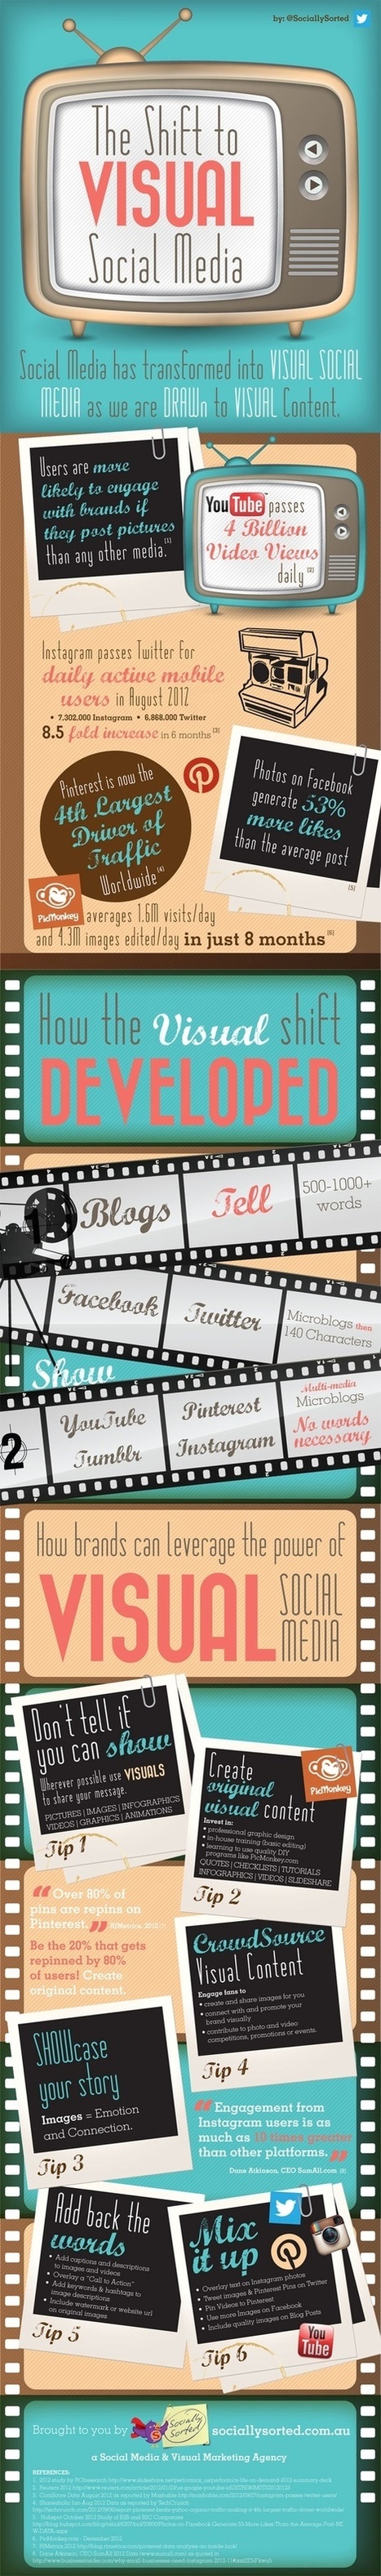 Visual CRUSHING Textual Social Marketing [infographic] | Curation Revolution | Scoop.it